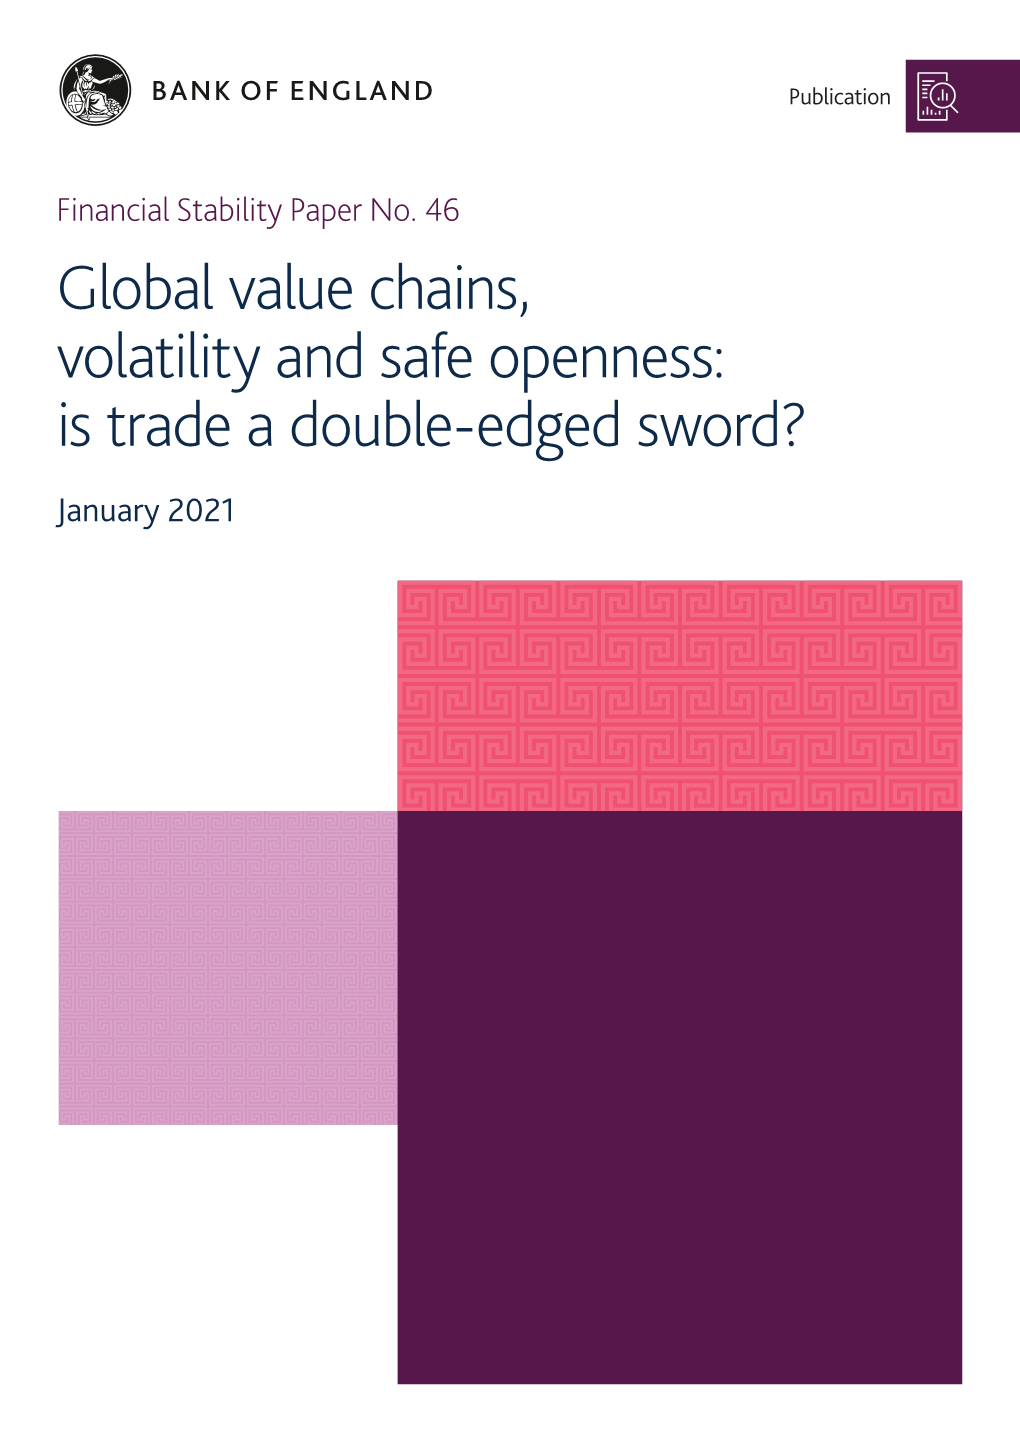 Global Value Chains, Volatility and Safe Openness: Is Trade a Double-Edged Sword?